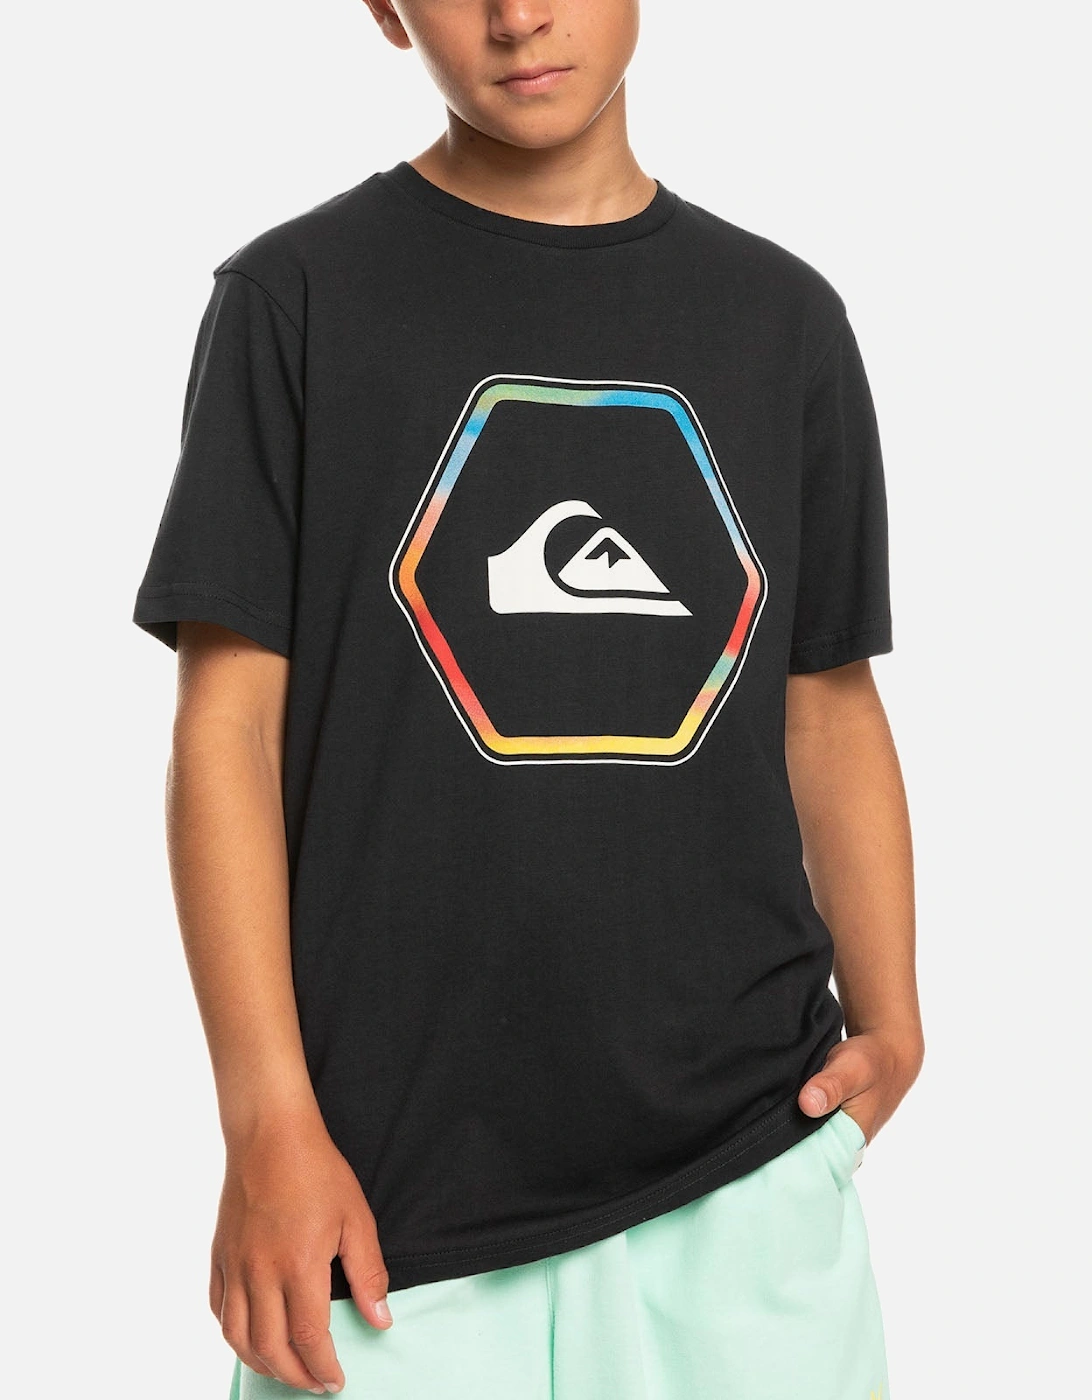 Kids In Shapes Crew Neck Cotton T-Shirt